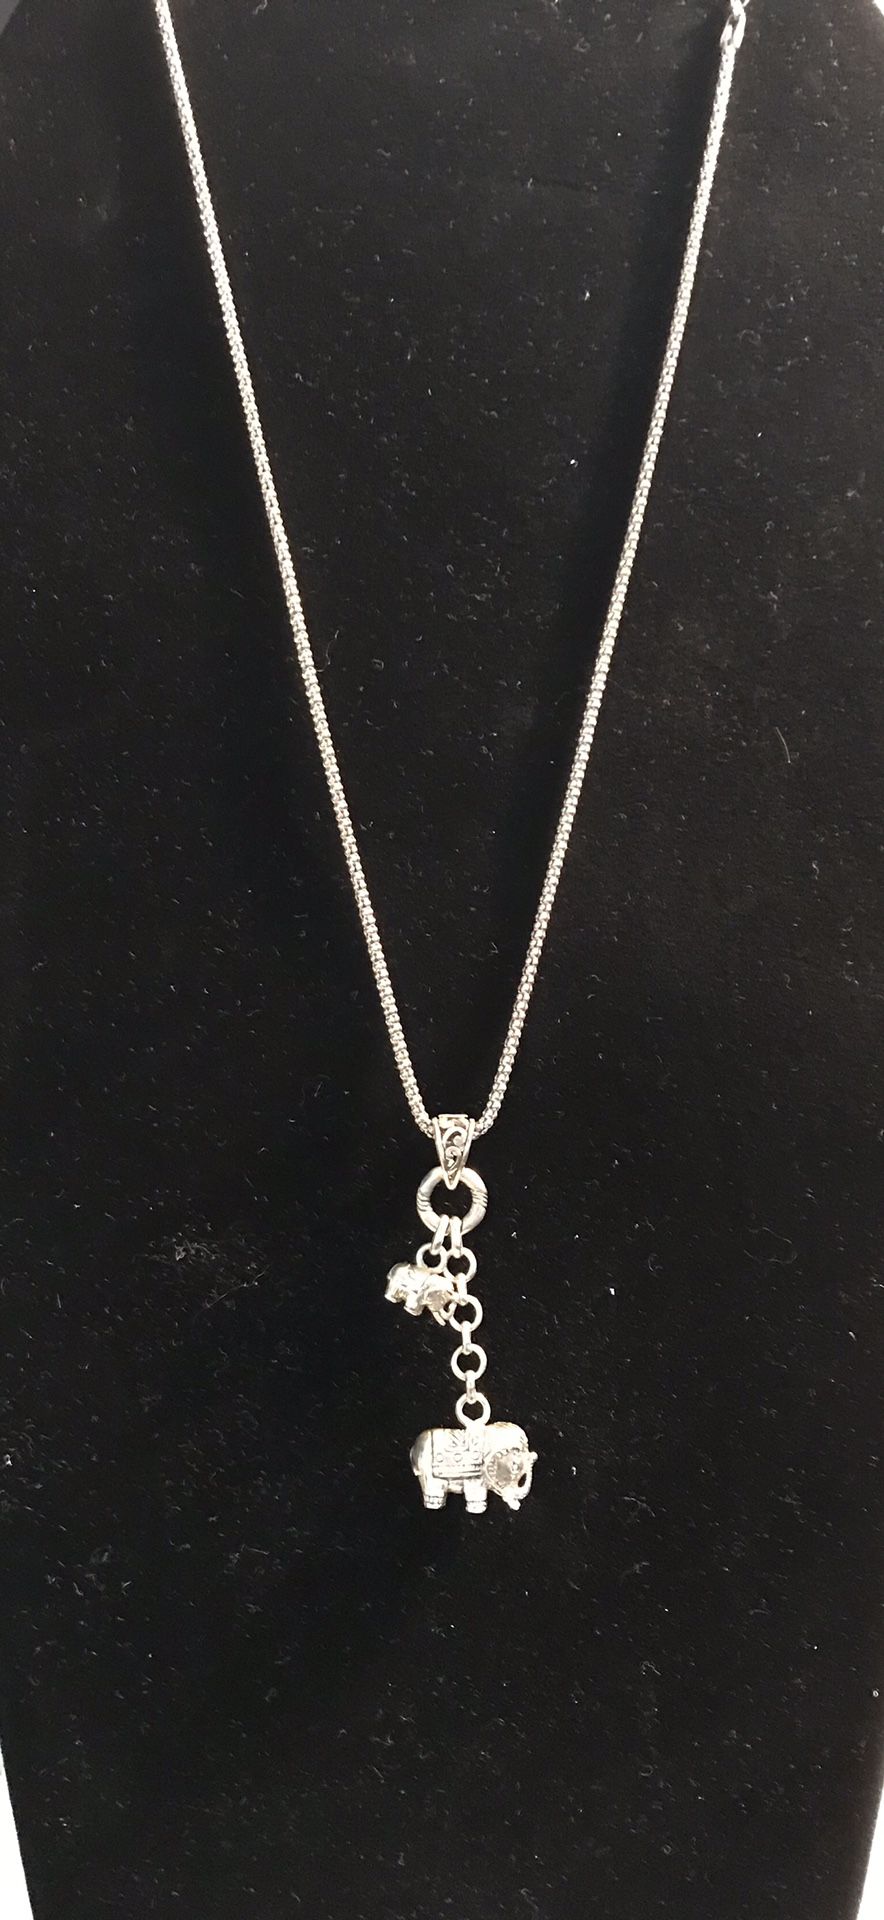 Thick sterling silver necklace with elephant & baby